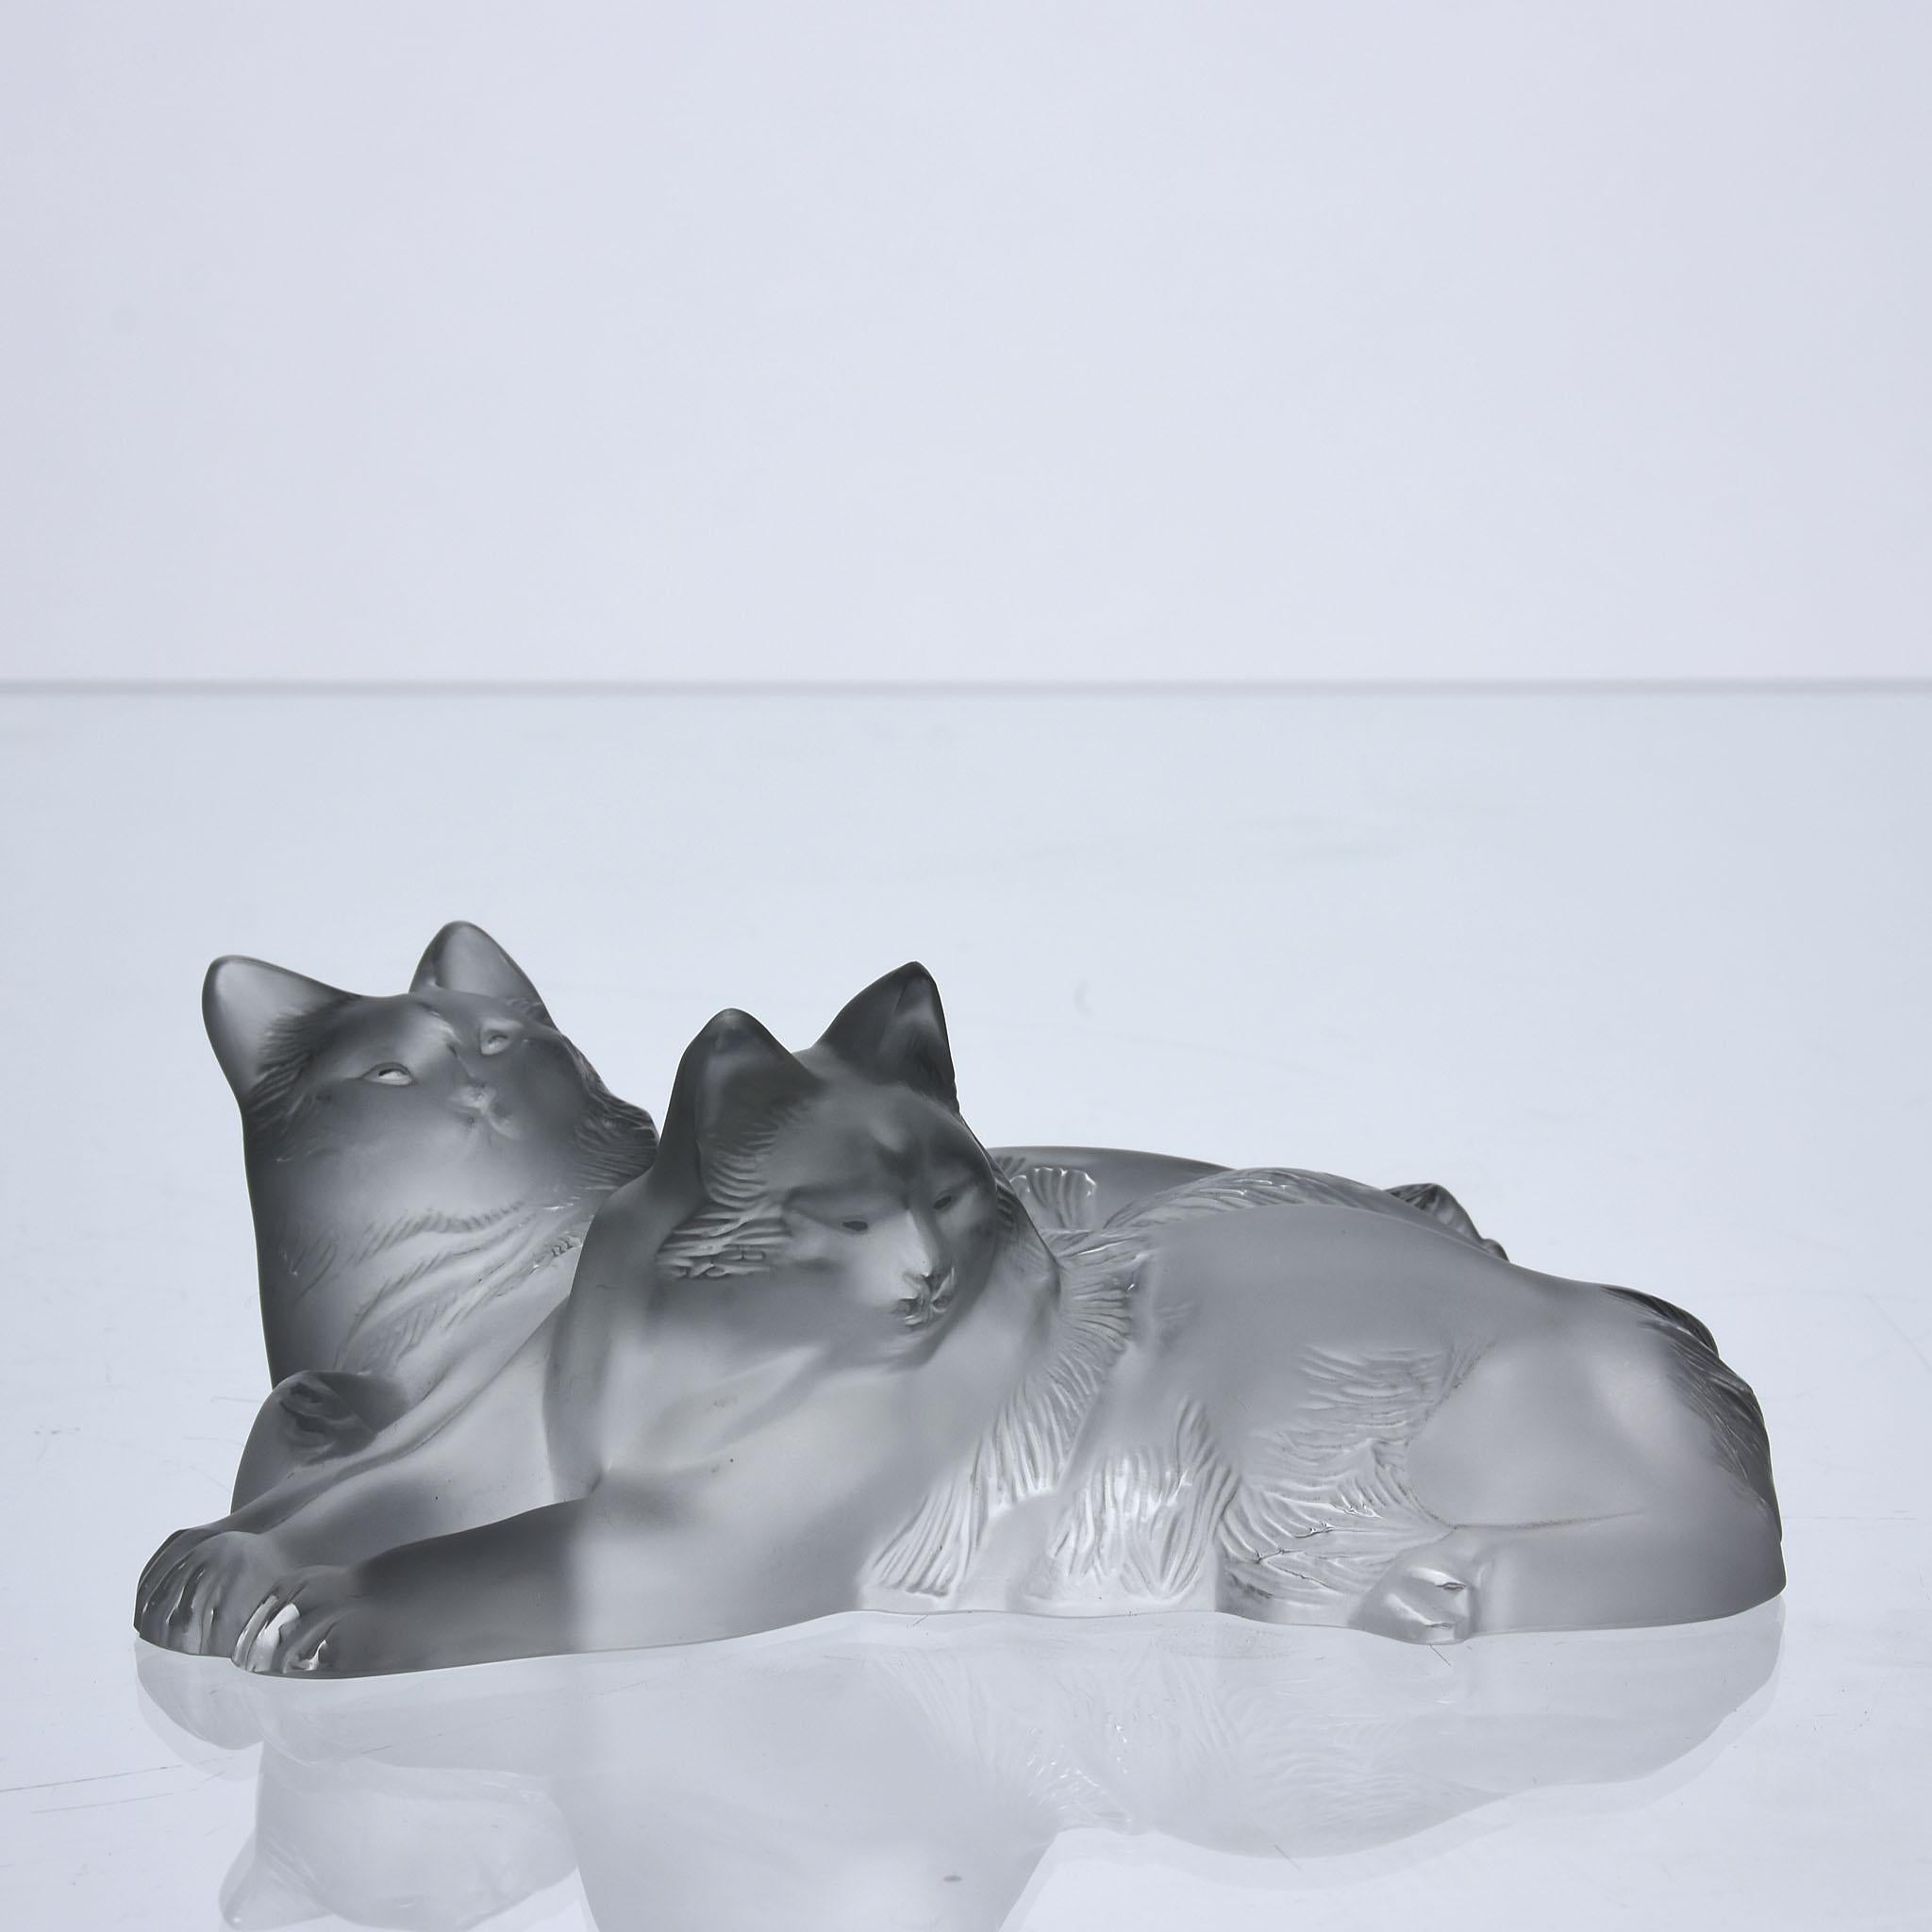 A delightful frosted crystal glass group of two reclining cats resting with fine hand finished detail, signed Lalique France
Additional information

Measures: width: 16 cm

Condition: excellent condition

Circa: 1970

Materials: frosted